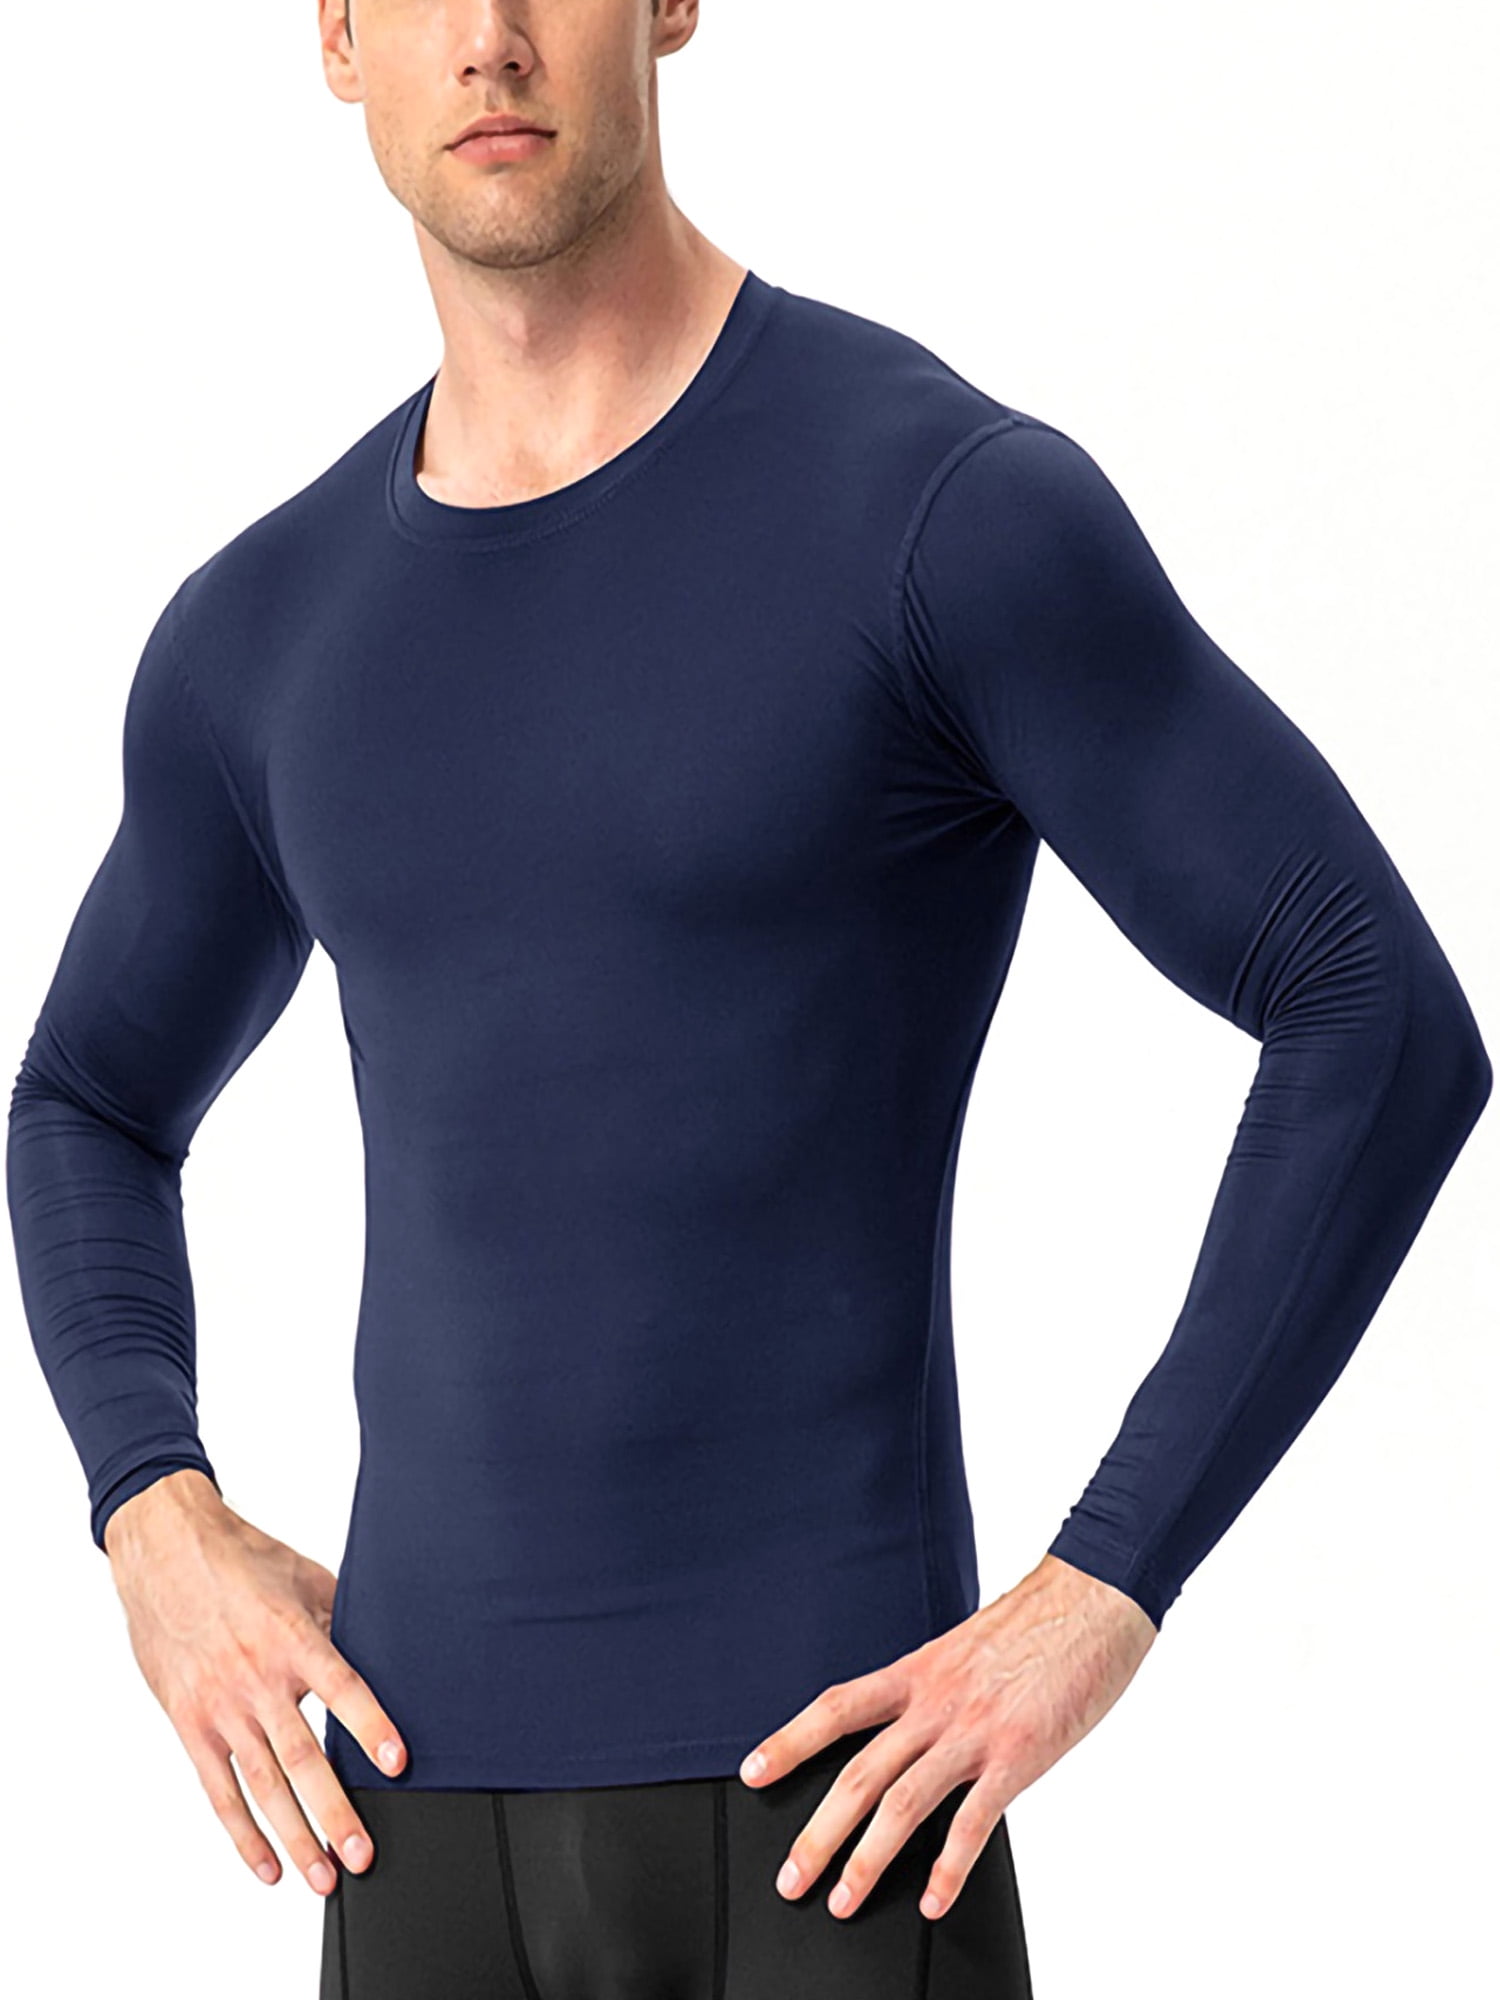 Glonme Mens Muscle Tops Long Sleeve Compression Shirts Baselayer